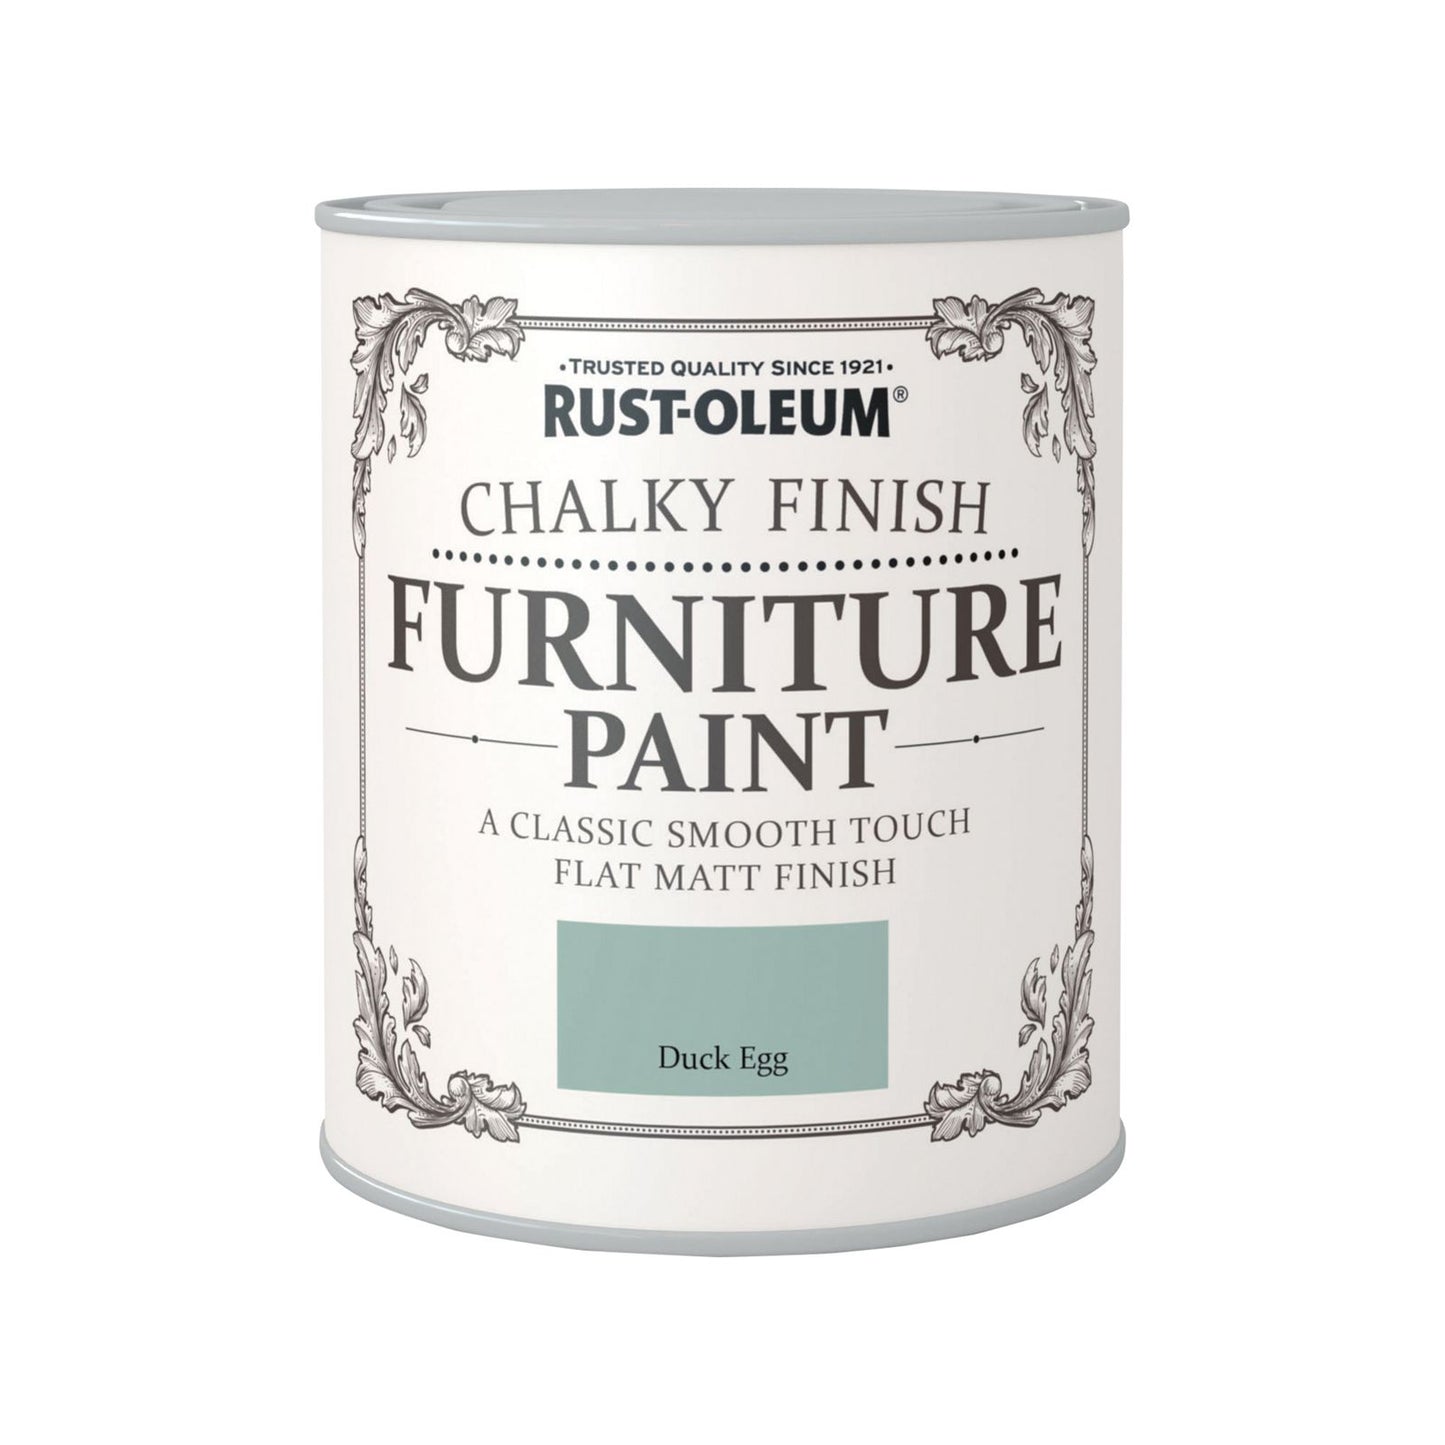 Rust-Oleum Chalky Finish Furniture Paint Duck Egg